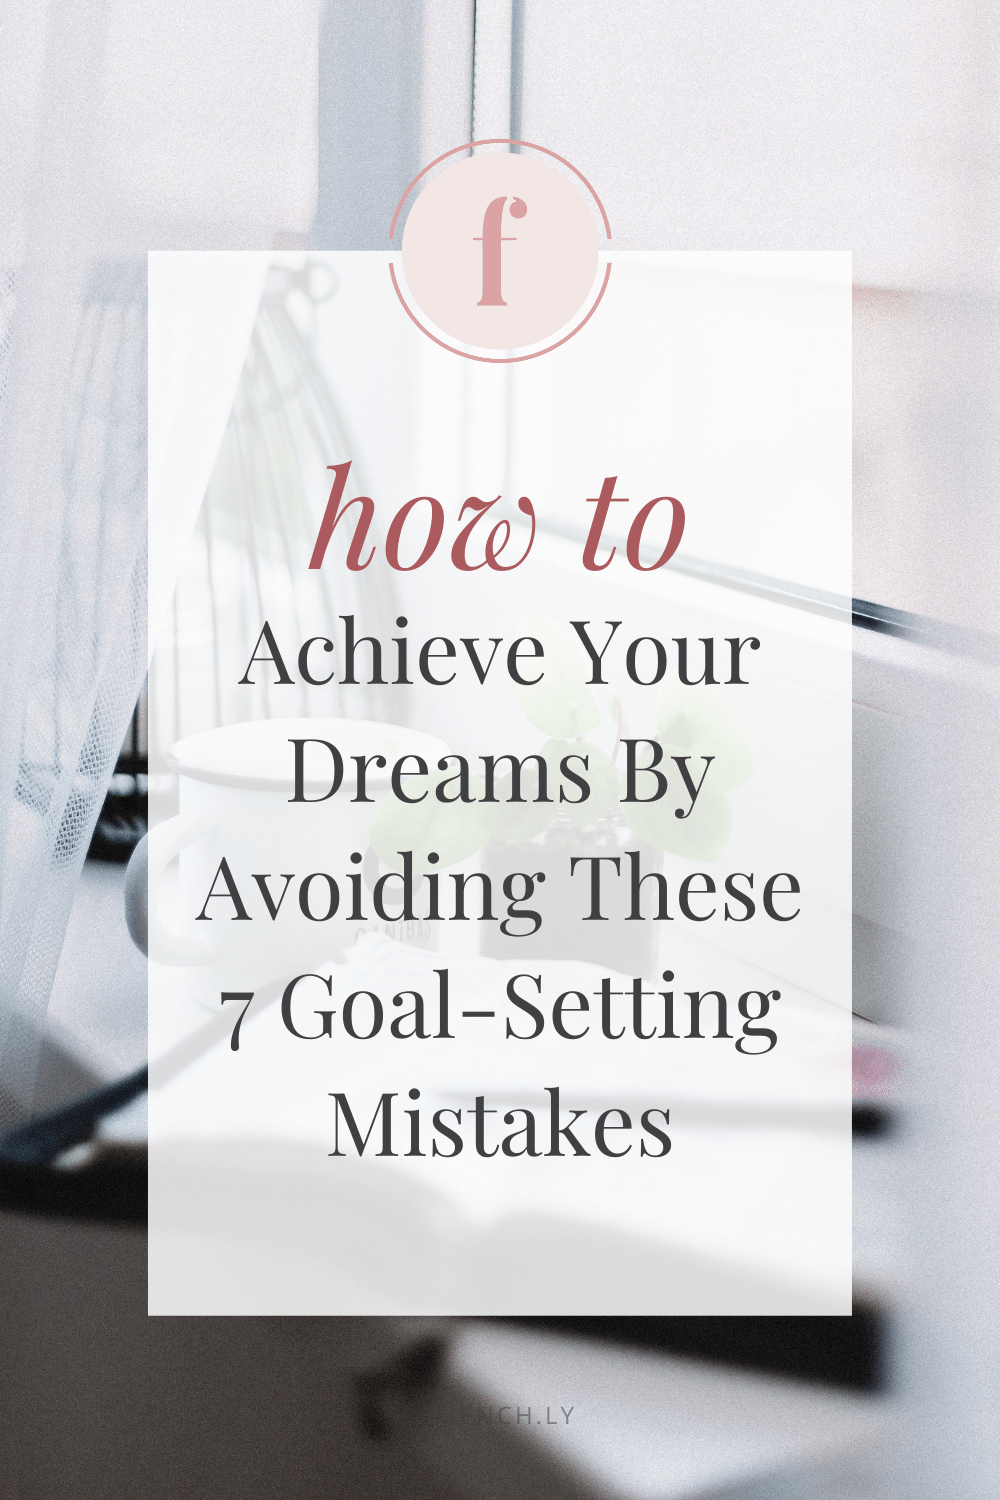 How To Achieve Your Dreams By Avoiding These 7 Goal-Setting Mistakes | Frenchly Food + Product Photography